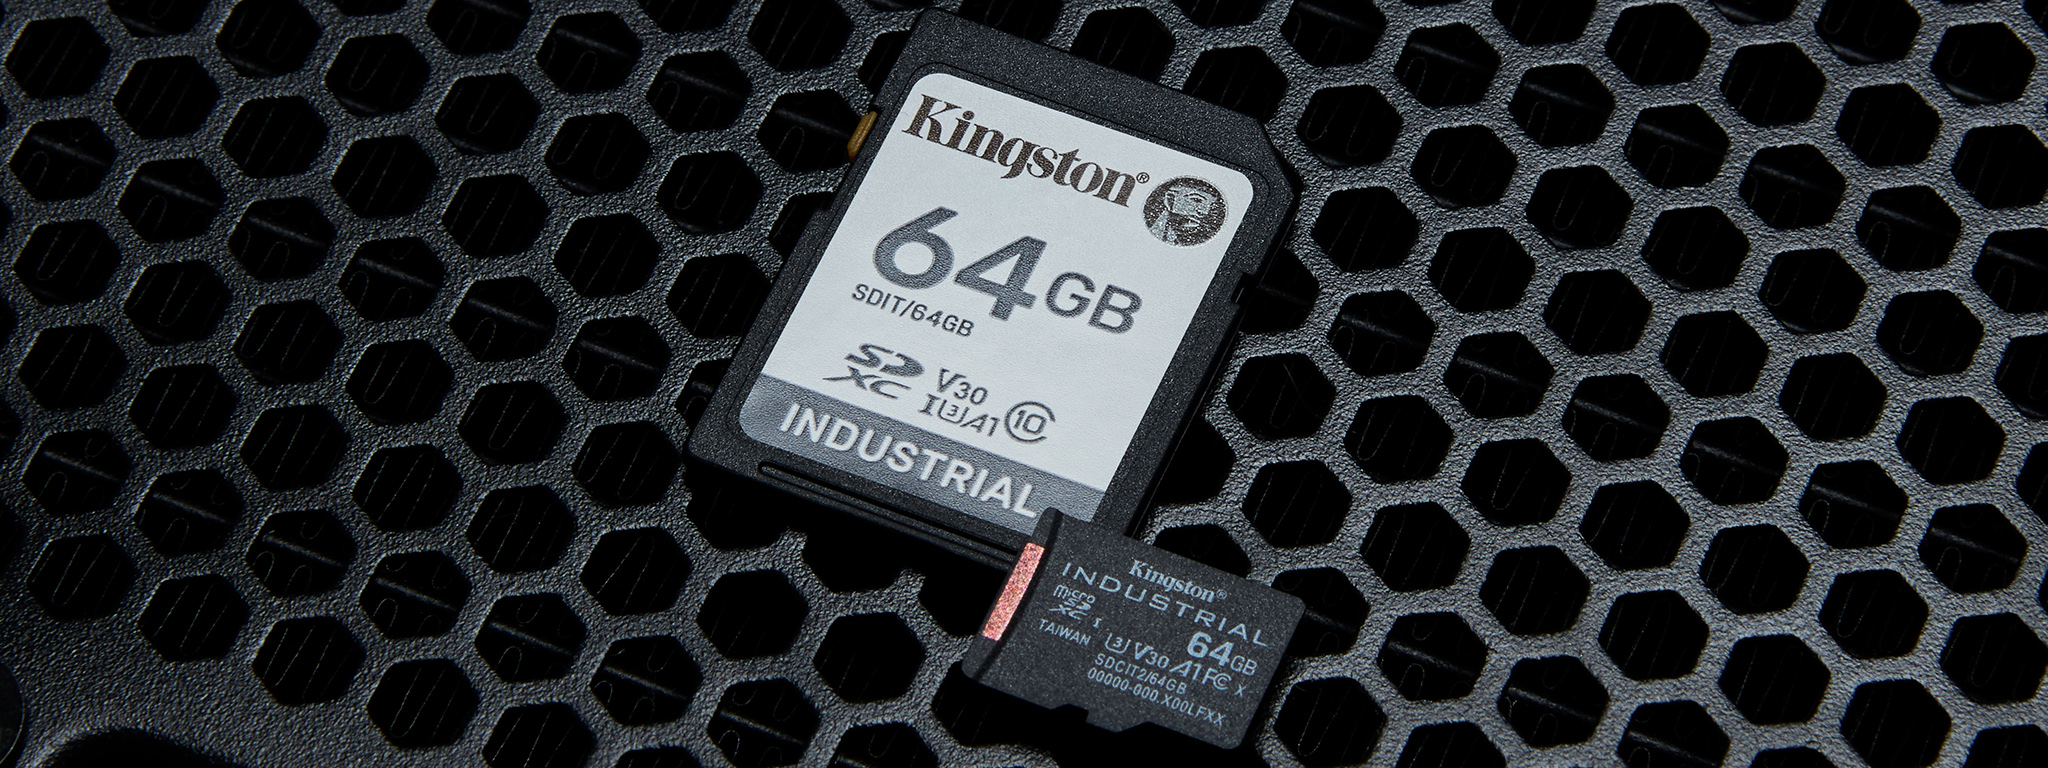 A pair of Kingston 64GB Industrial microSD cards siting on a distressed metal surface